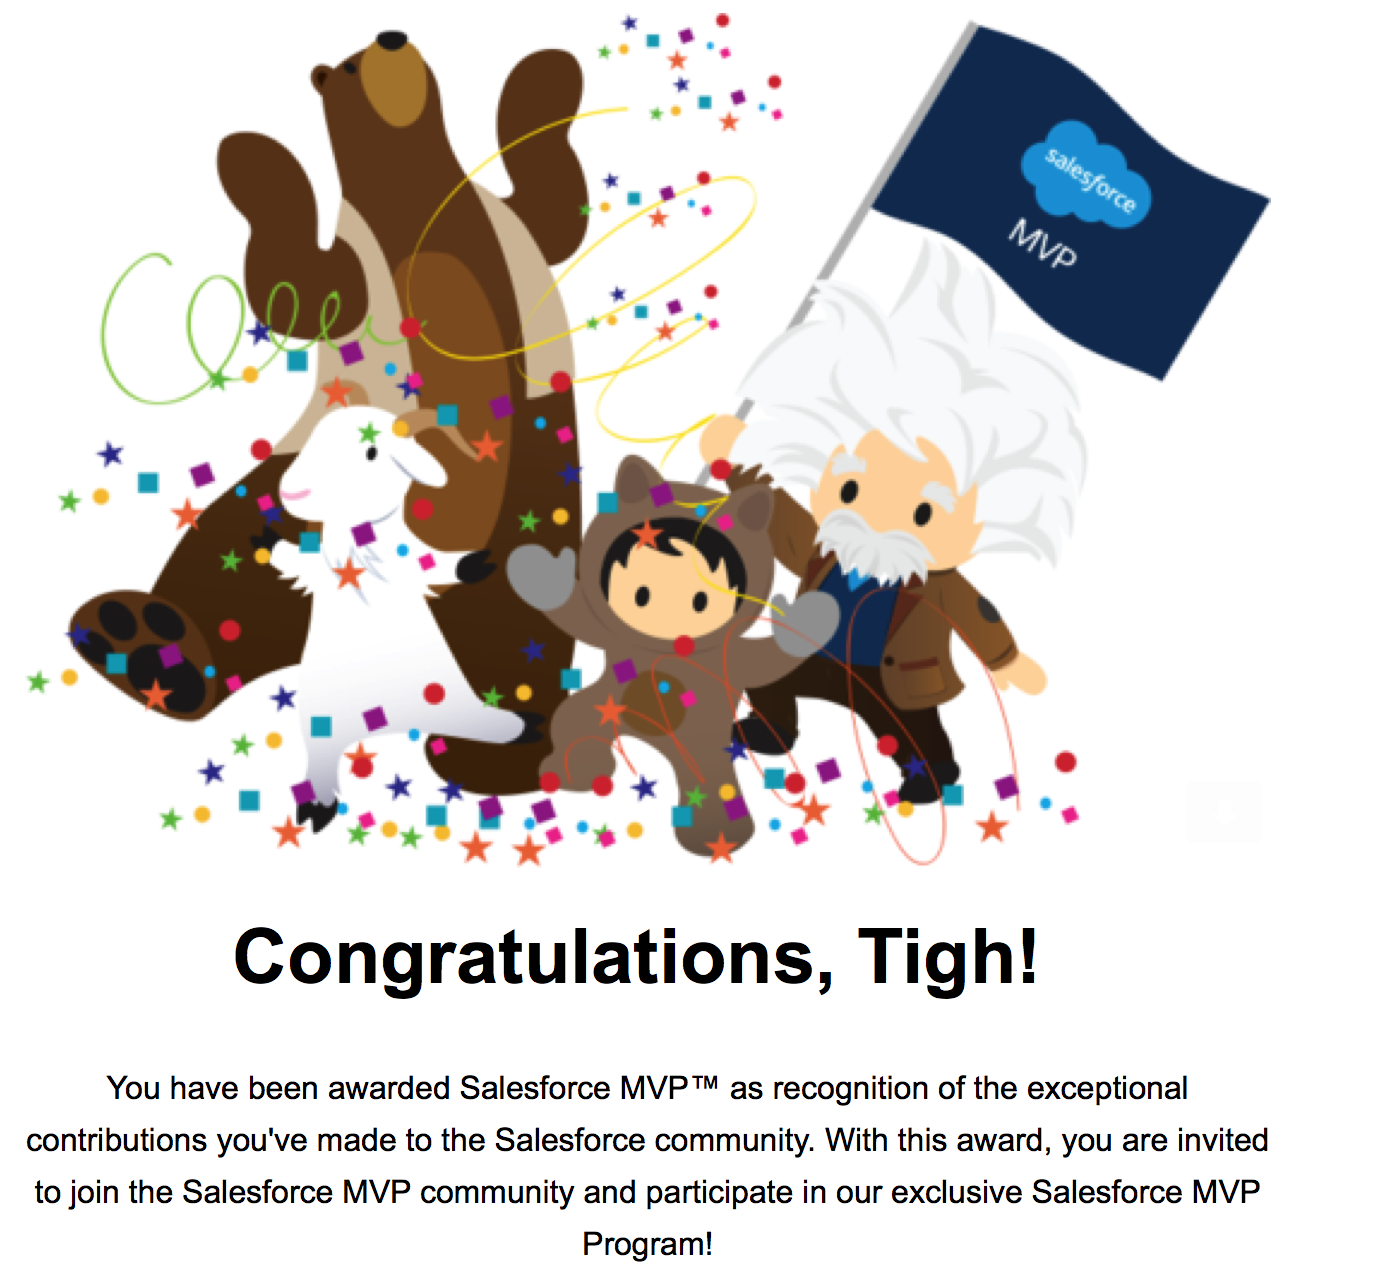 Tigh Loughhead is a Salesforce MVP for contributions to the Pardot and SFDC Trailblazer Community